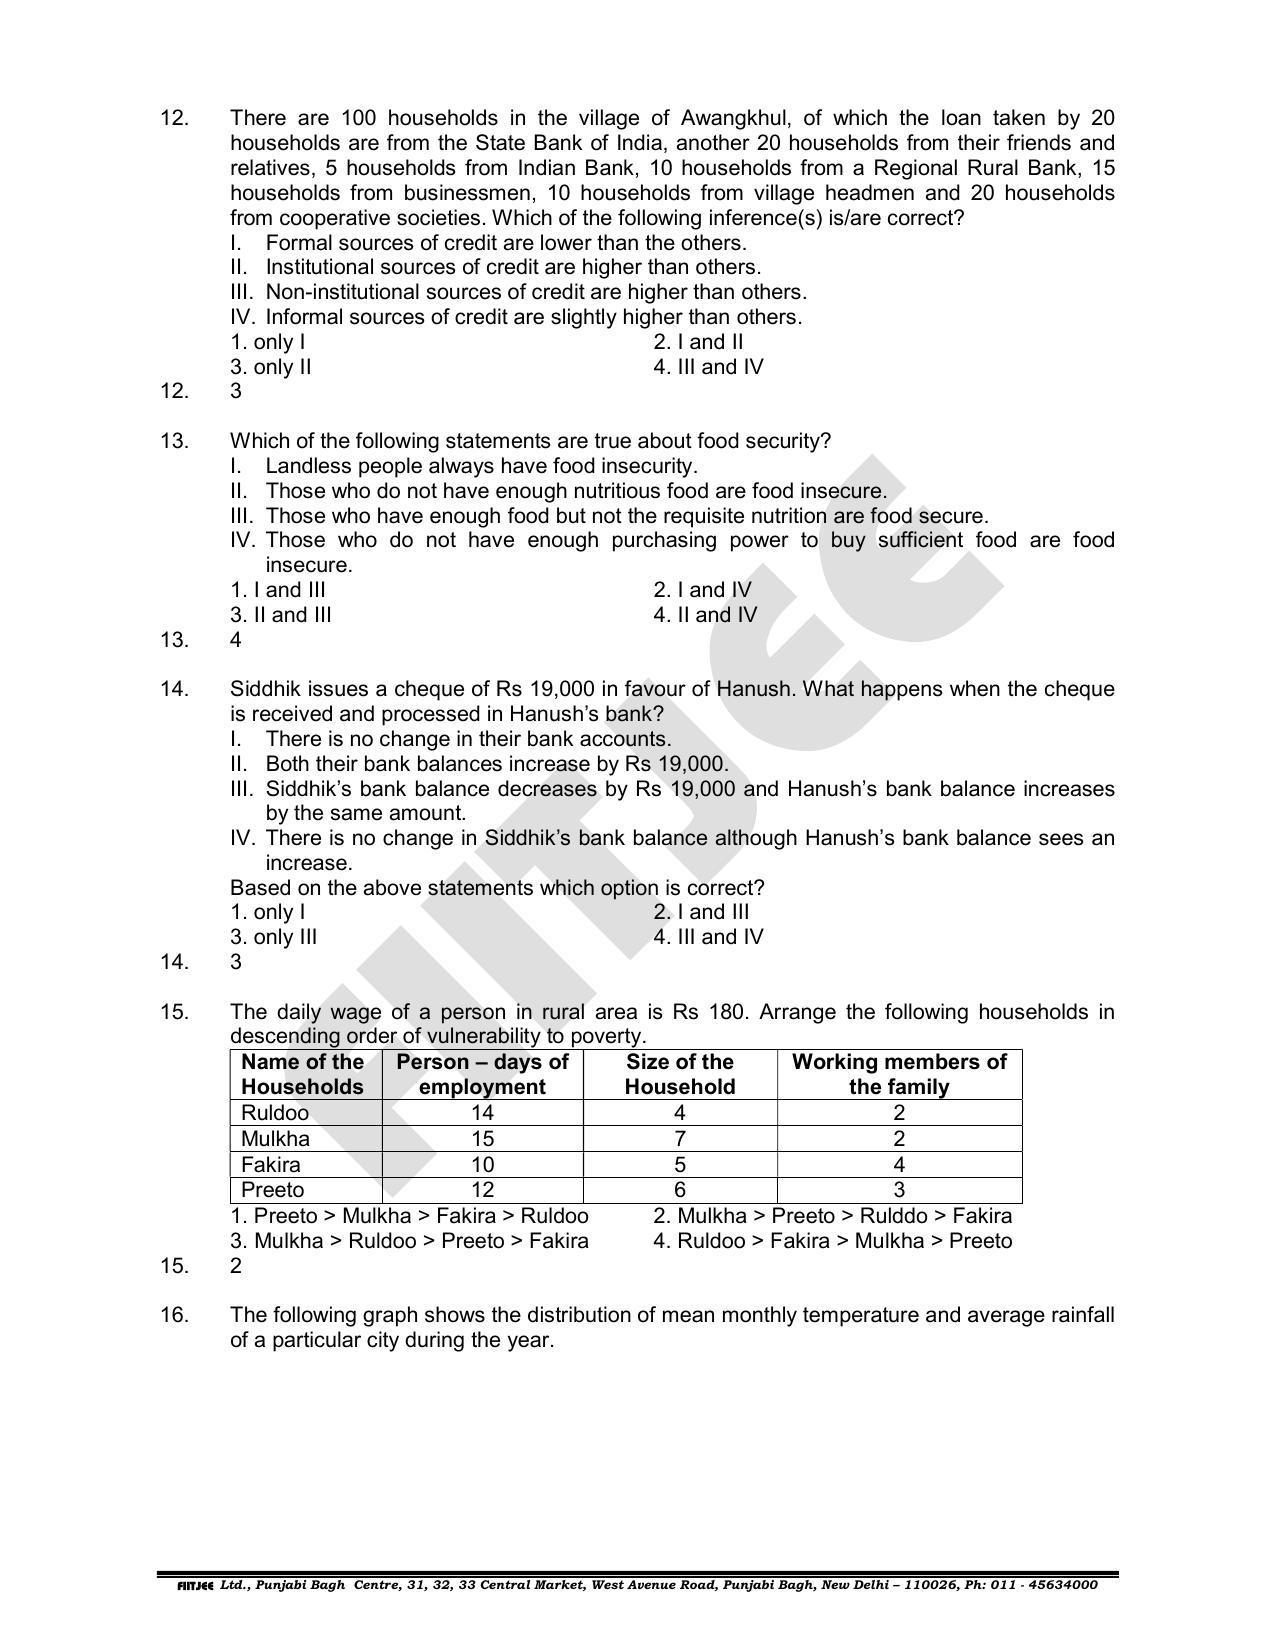 NTSE 2019 (Stage II) SAT Paper with Solution (June 16, 2019) - Page 4